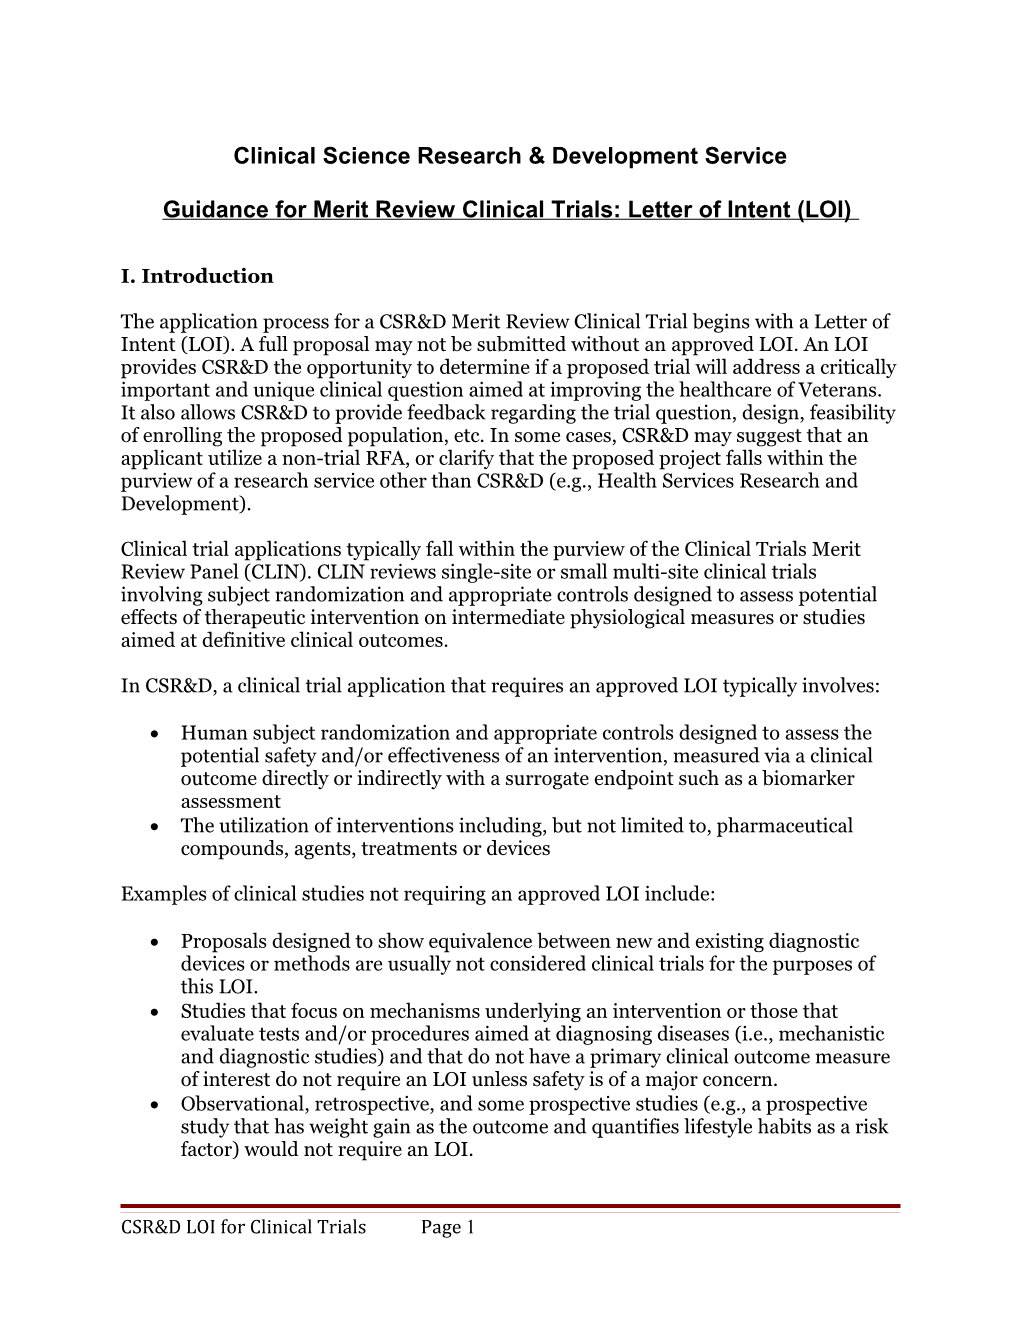 Guidance for Merit Review Clinical Trials: Letter of Intent (LOI)